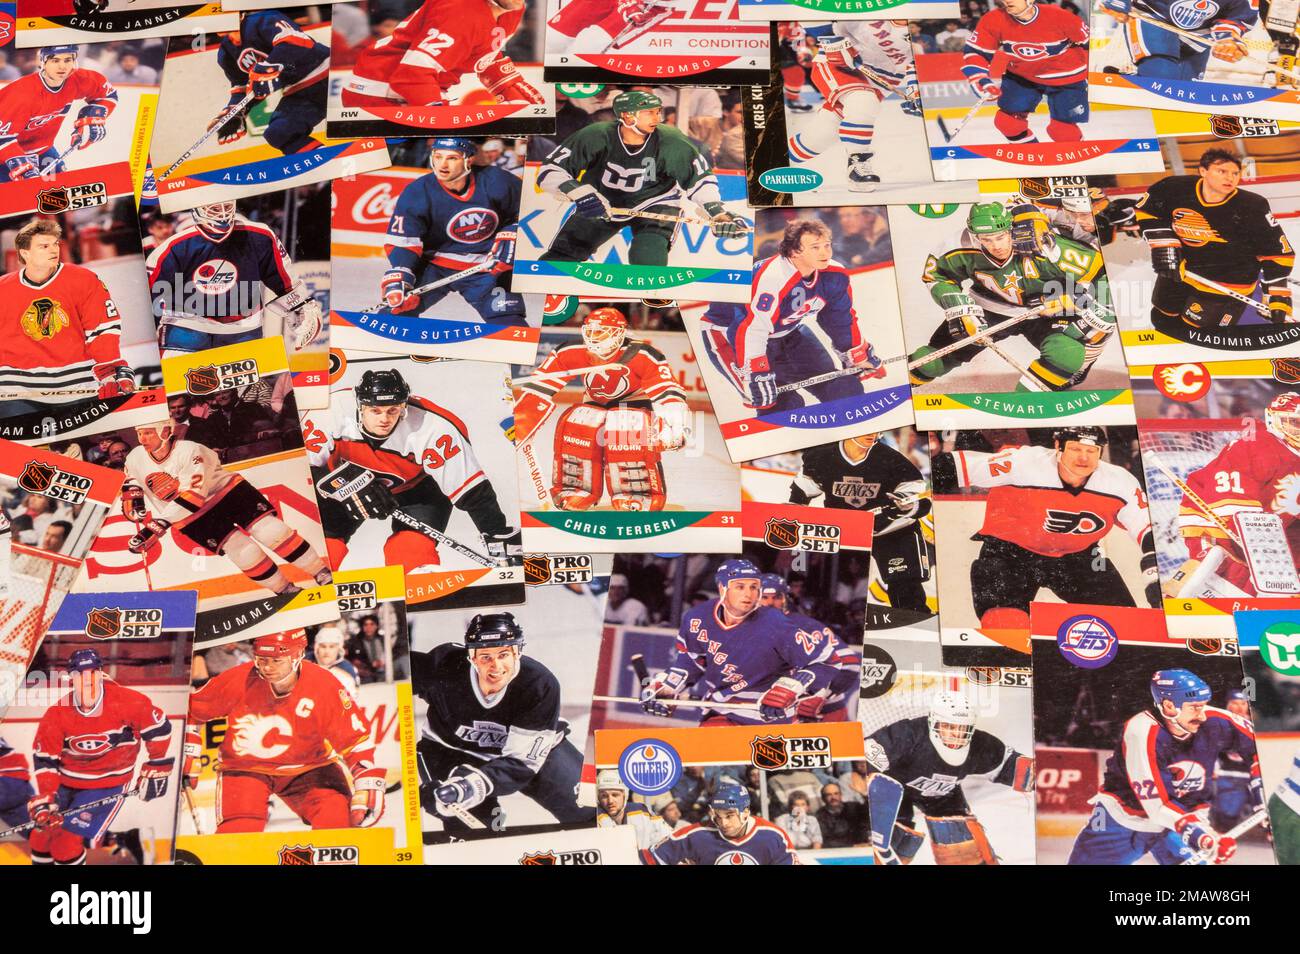 6,983 Hockey Cards Images, Stock Photos, 3D objects, & Vectors